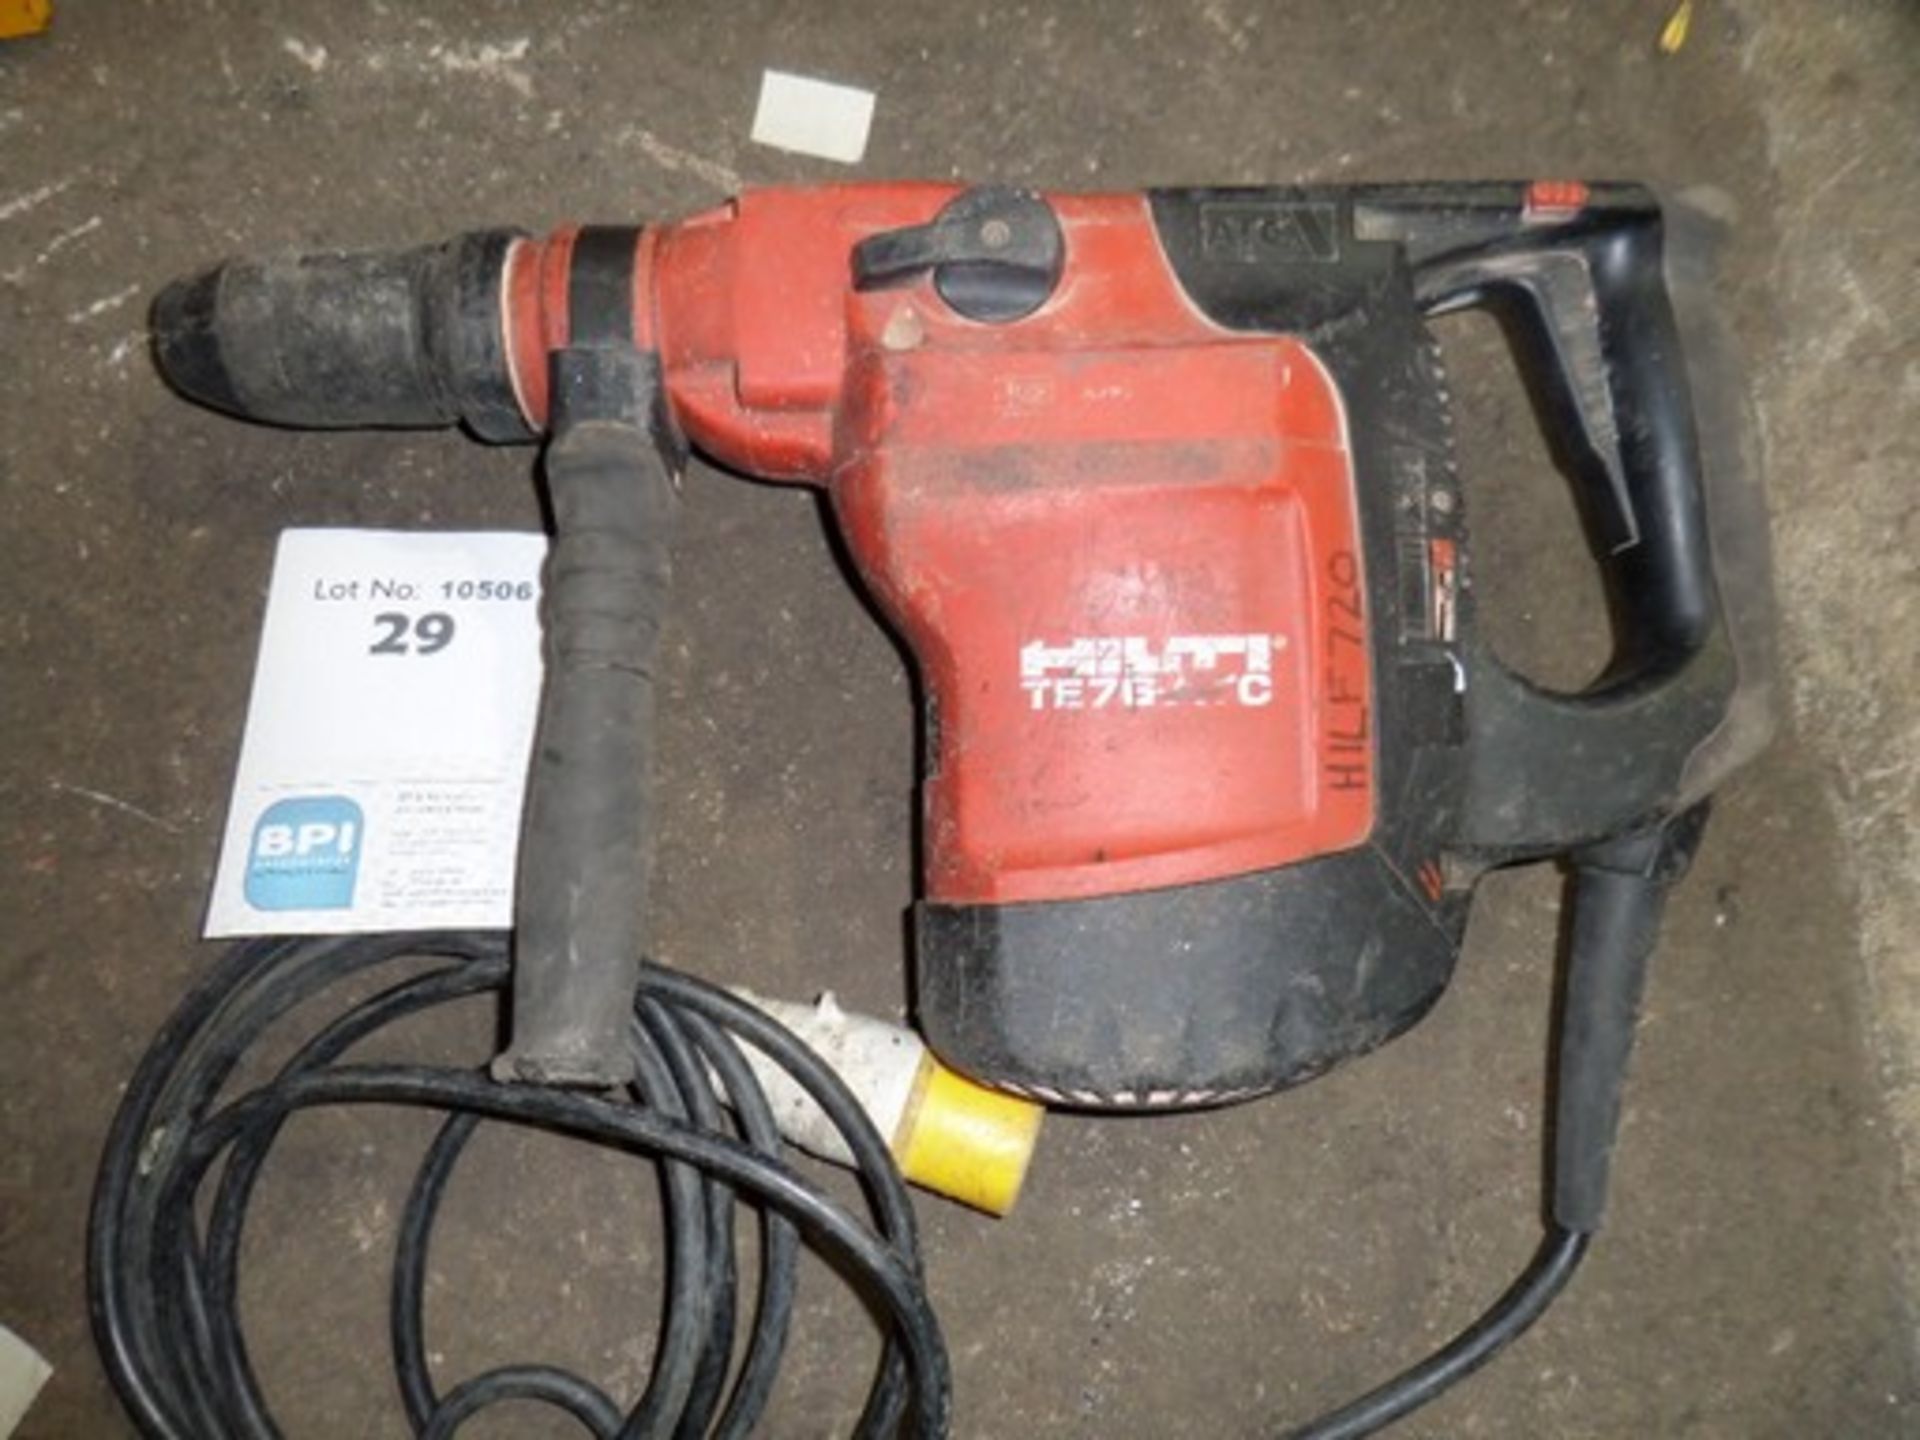 Hilti TE 76P-ATC {015192} HEAVY DUTY ATC COMBI-HAMMER 110V 110v 16amp connection and appears to be